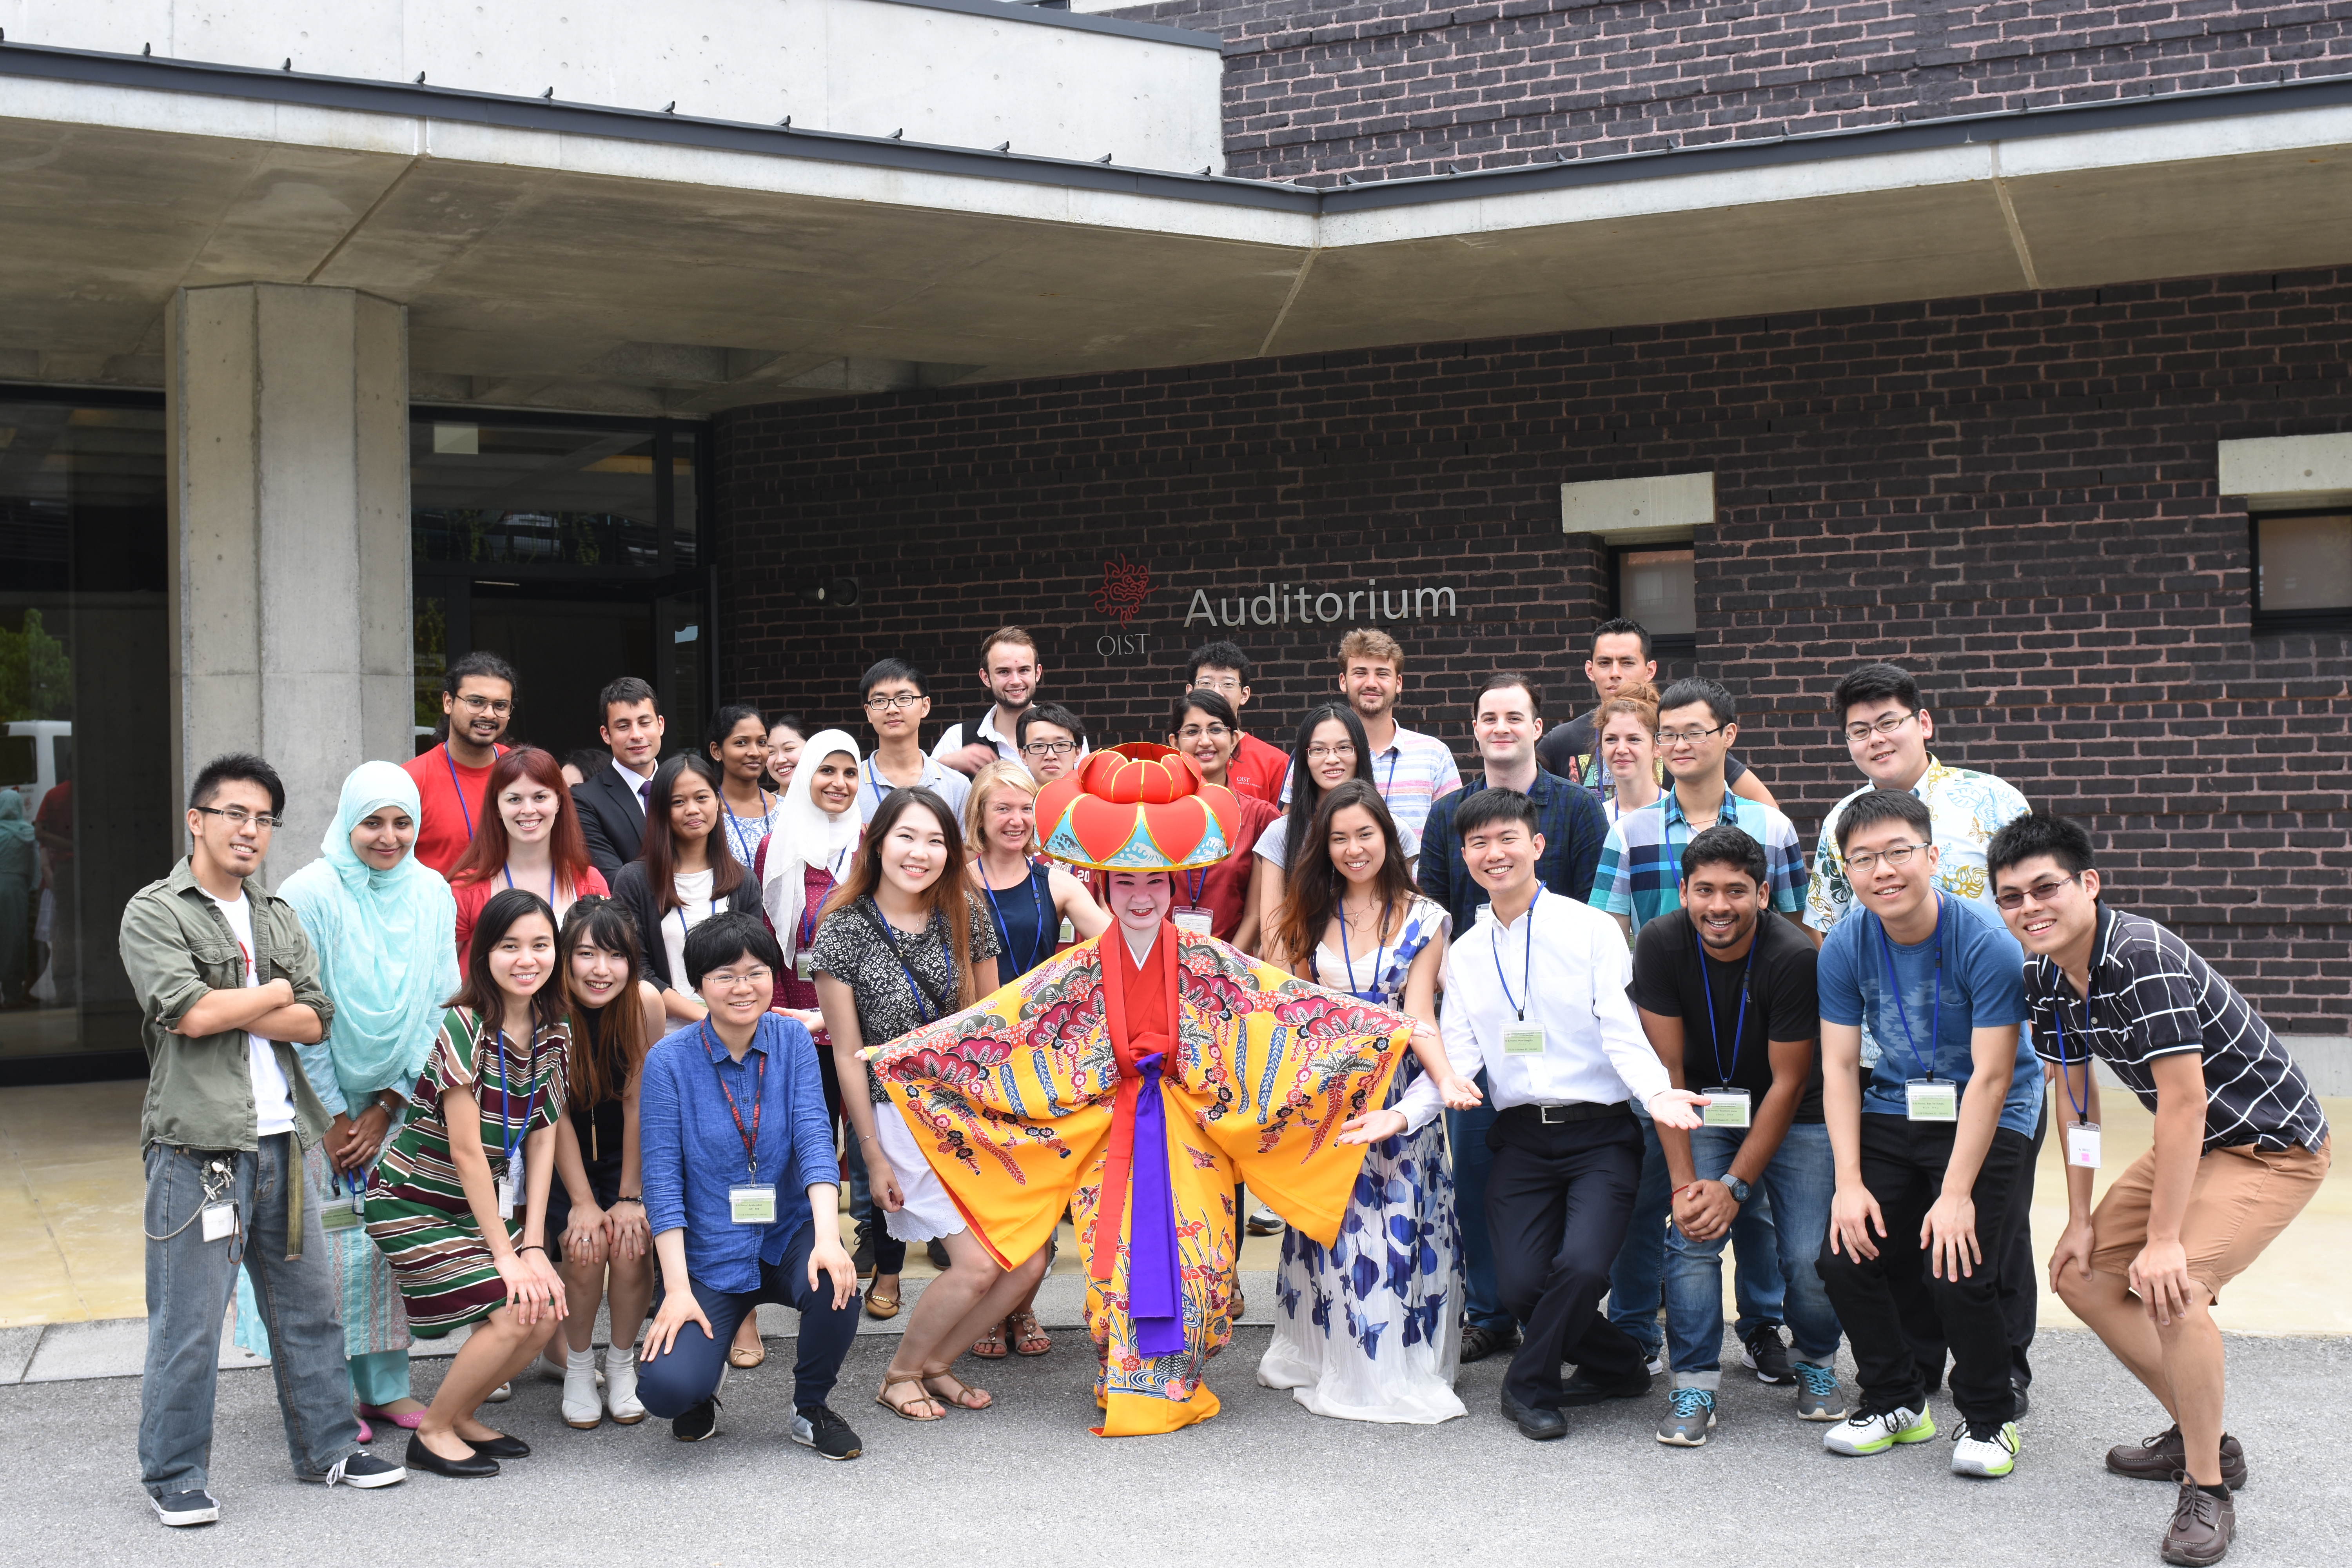 OIST welcomed its 5th class of doctoral students with OIST member Ami Chinen (center)